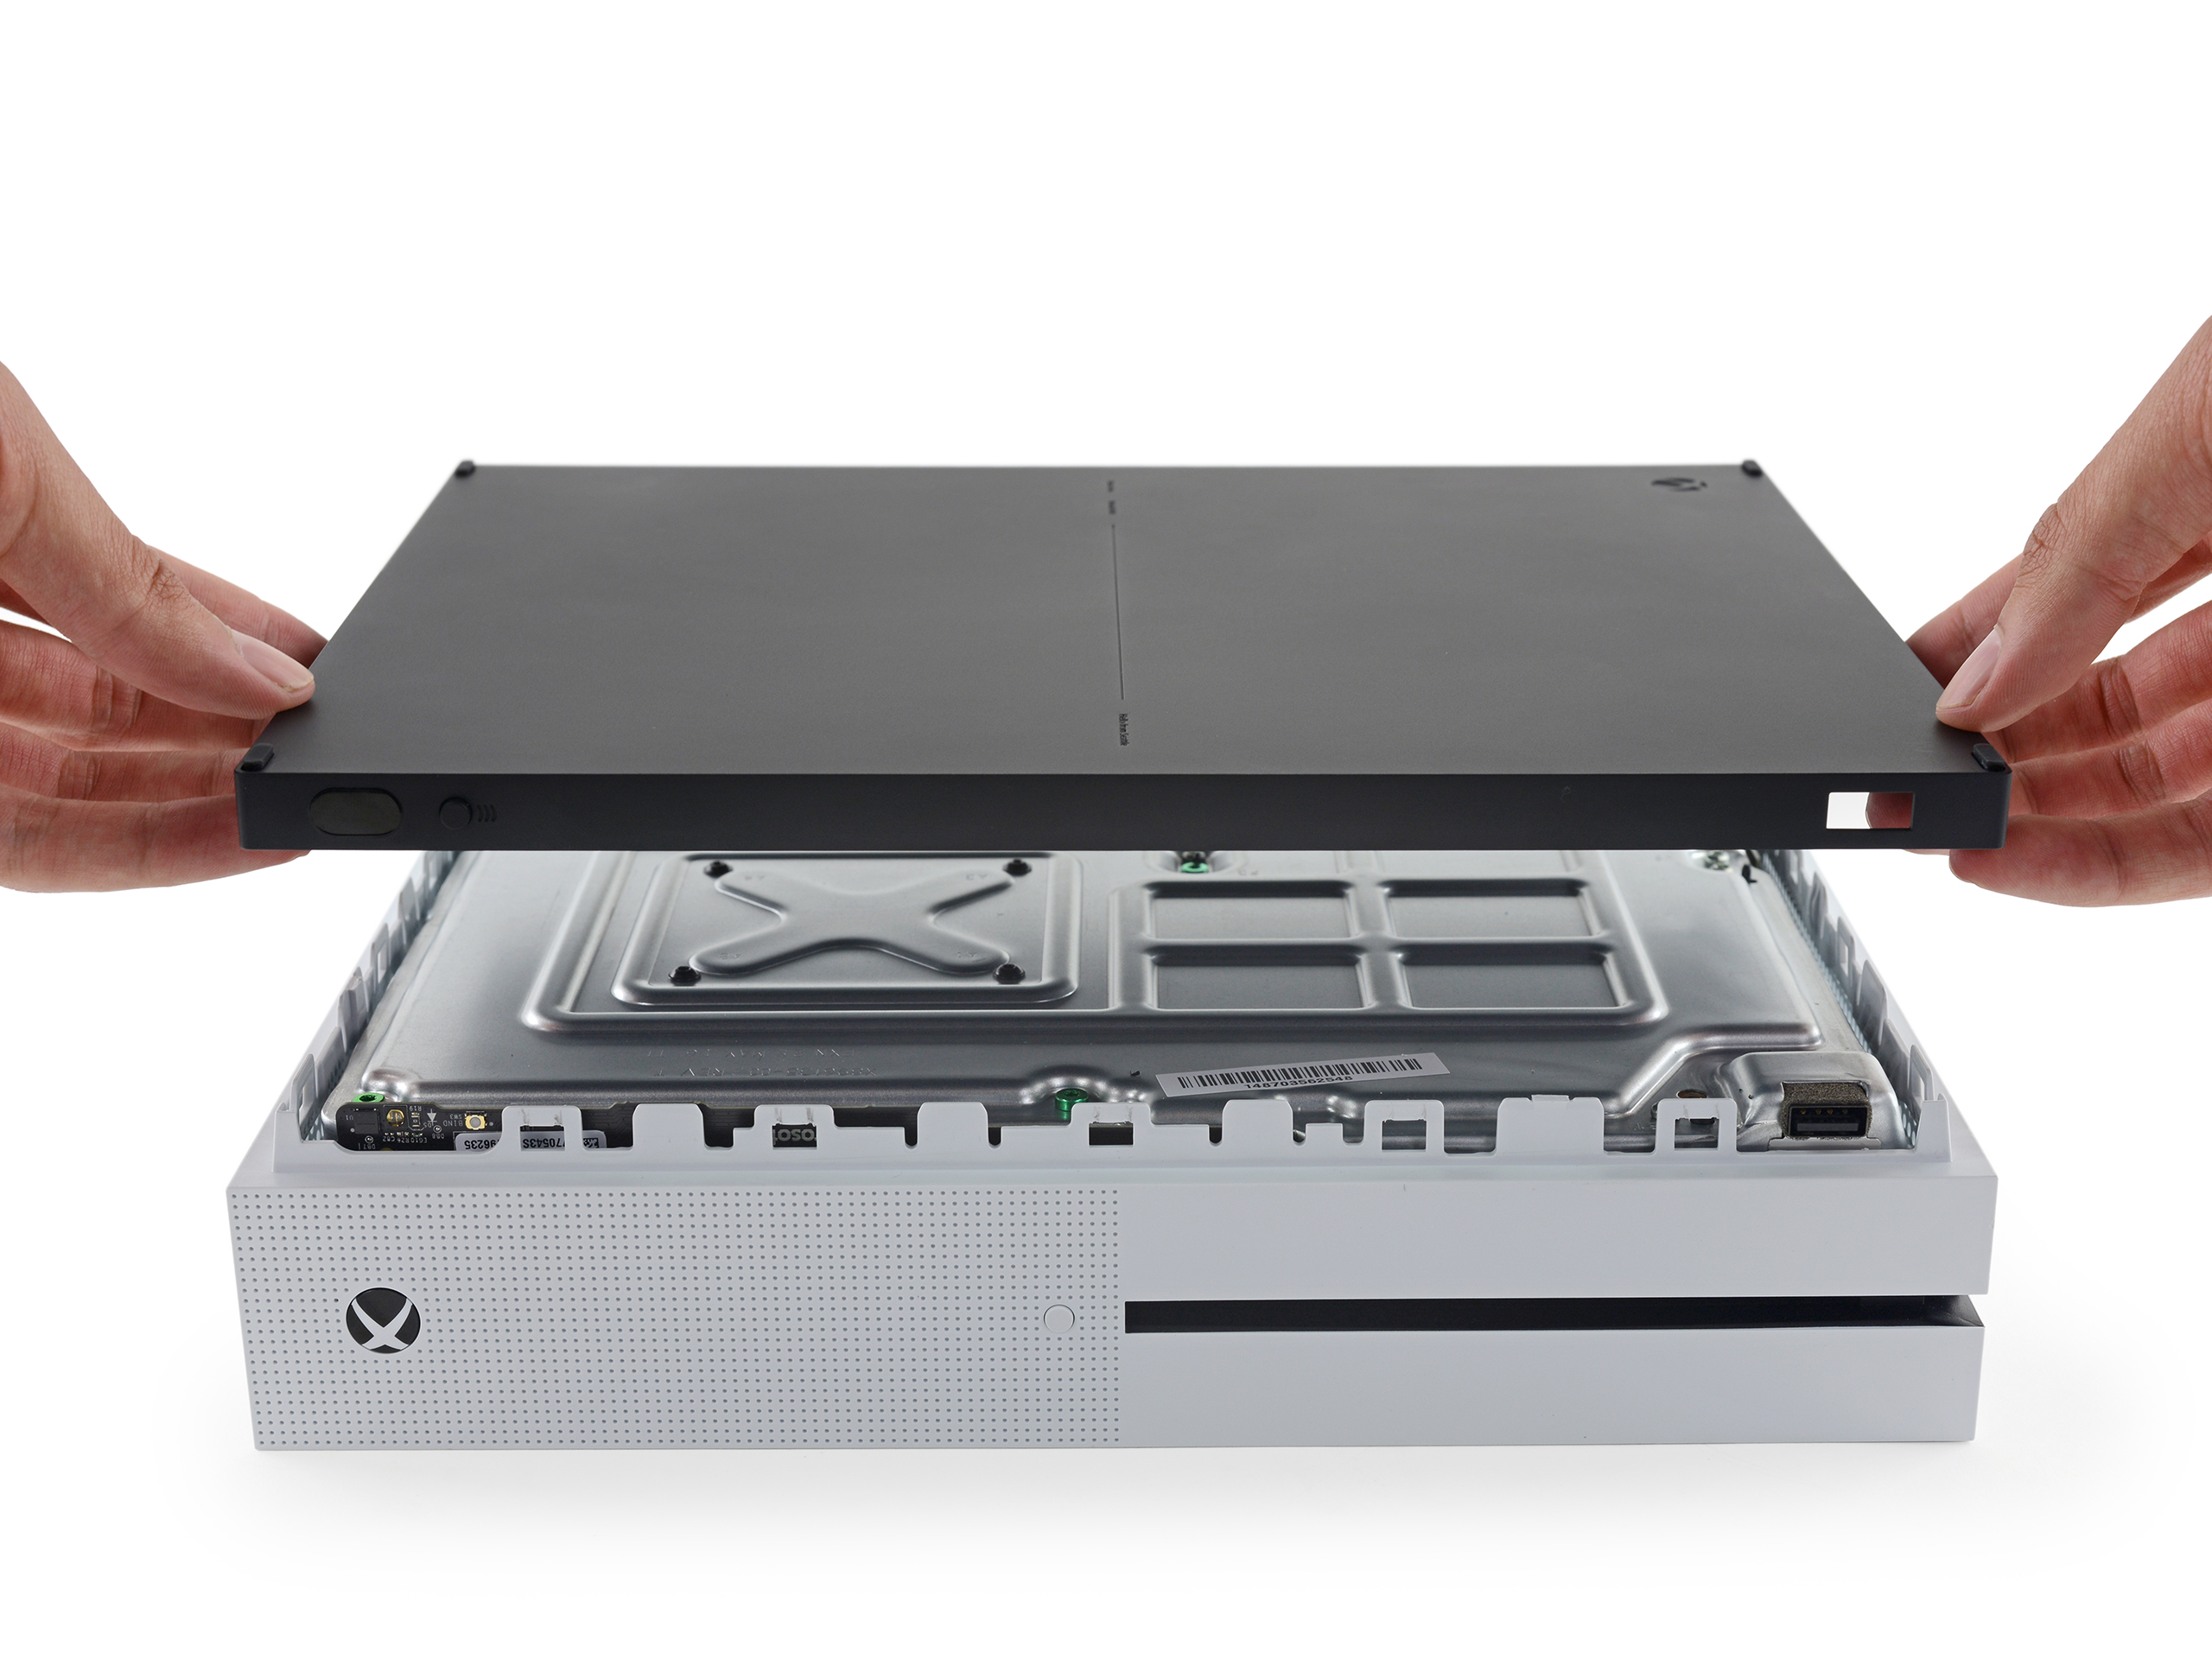 stereo levering halfrond See Inside Microsoft's New Xbox One S | Time